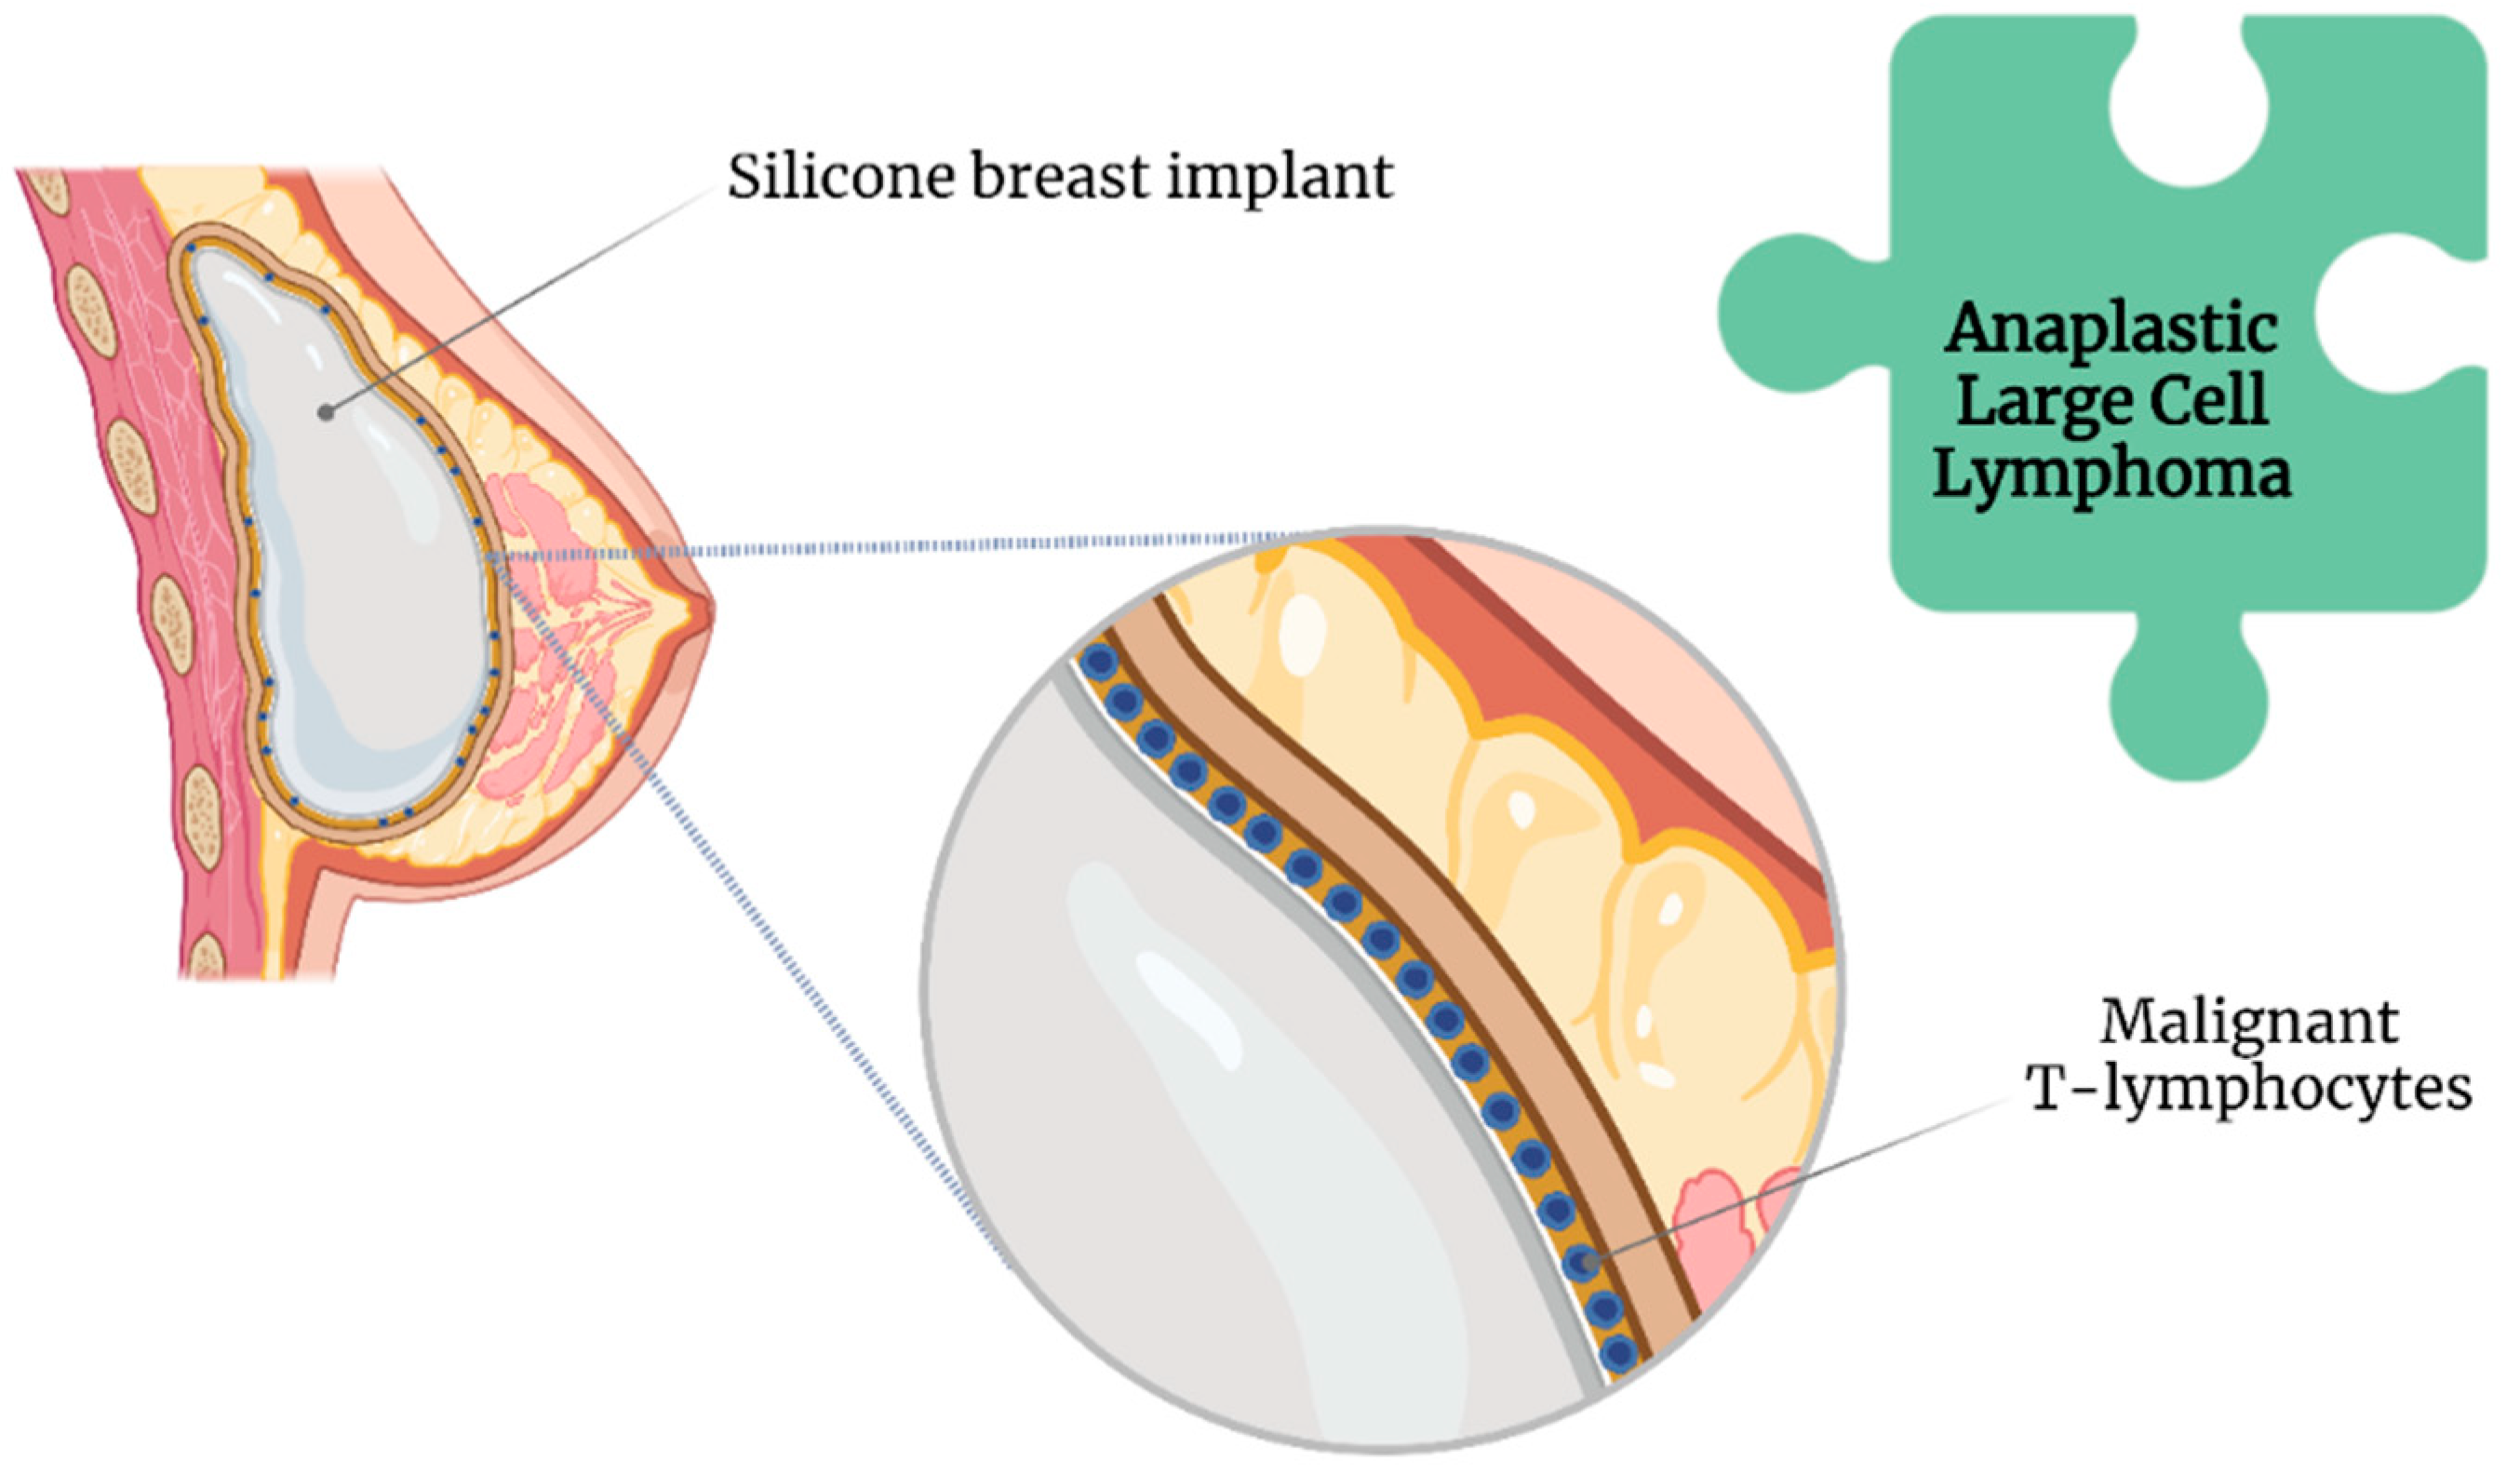 Can Breast Implants Cause Disease?